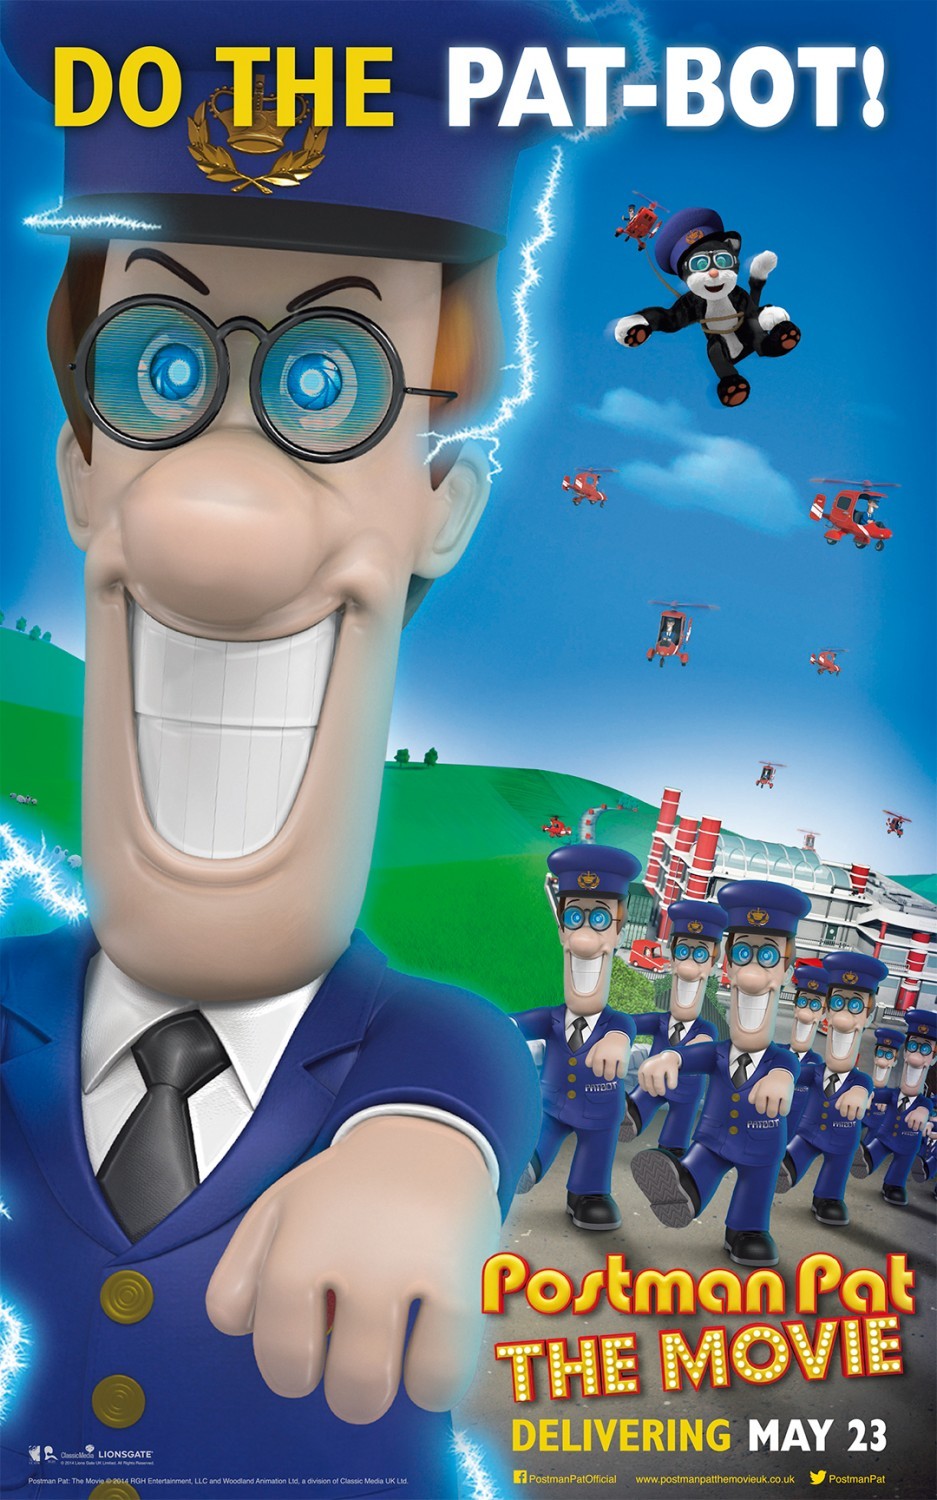 Poster of Shout! Factory's Postman Pat: The Movie (2014)